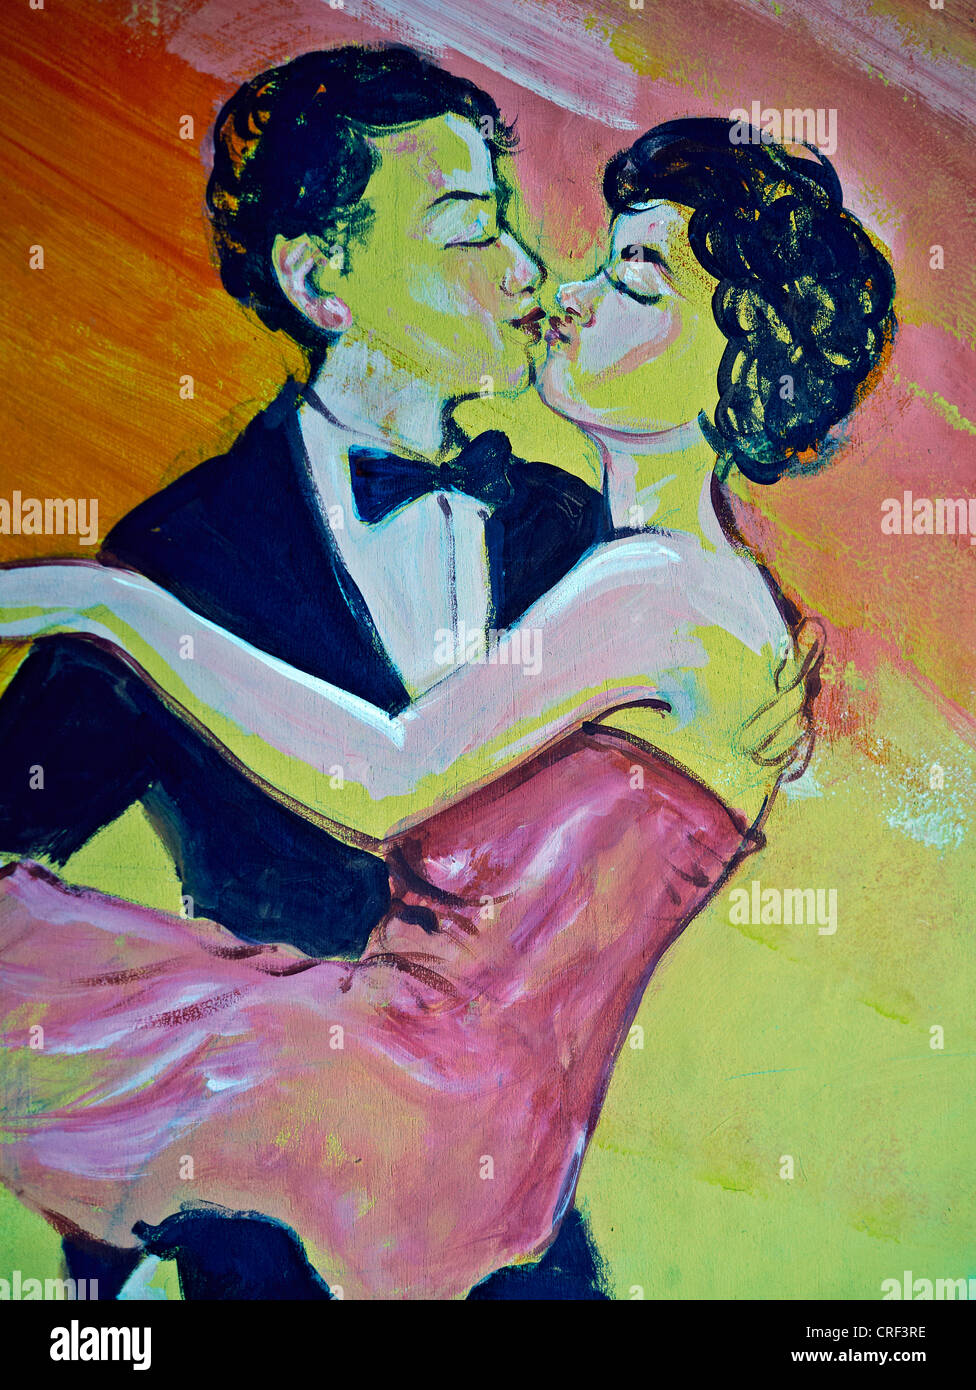 Pop art painting of a boy and girl kissing. c. 1950's. Thailand S.E. Asia Stock Photo